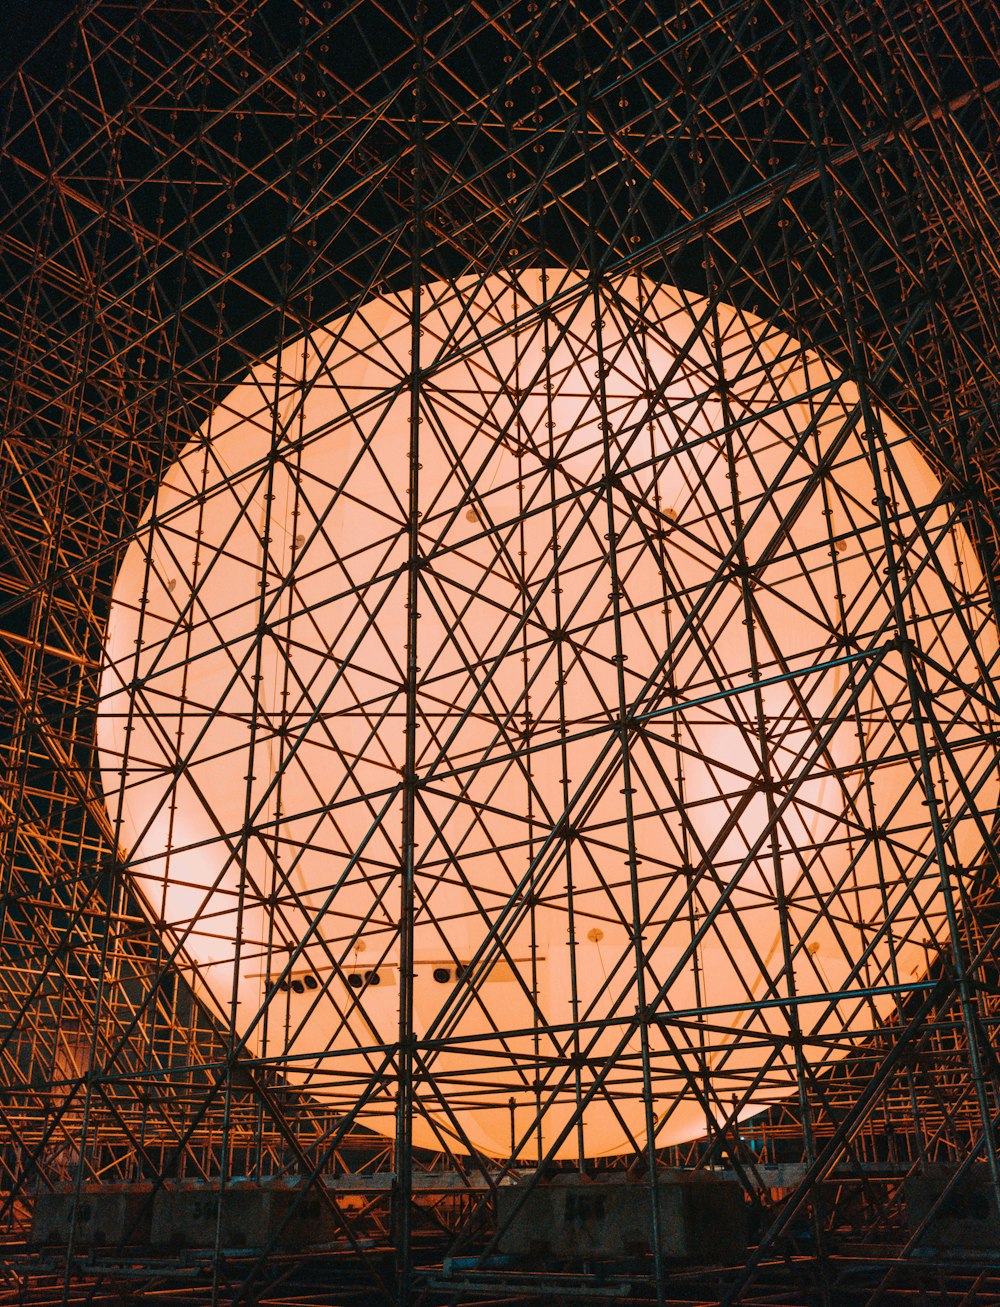 a large circular structure with many scaffolding around it